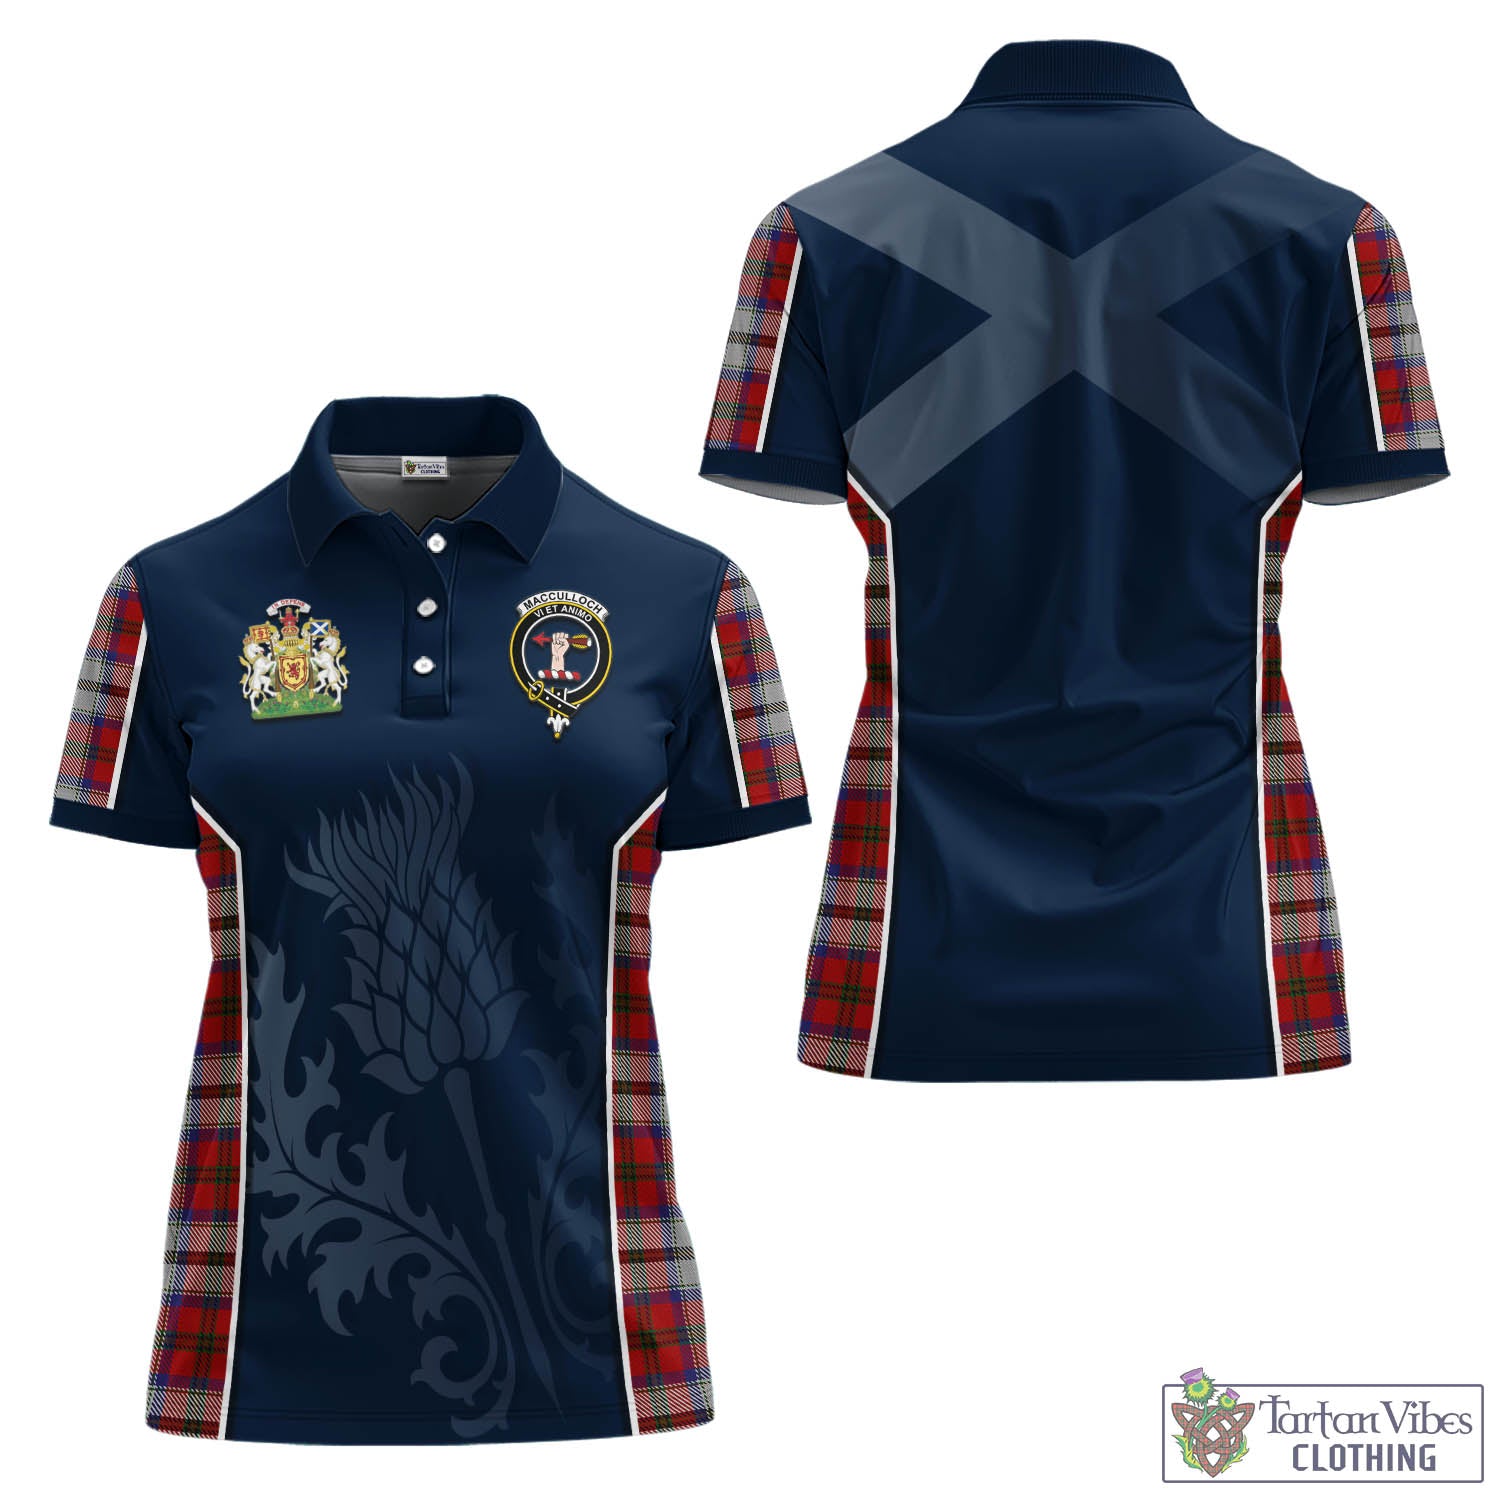 Tartan Vibes Clothing MacCulloch Dress Tartan Women's Polo Shirt with Family Crest and Scottish Thistle Vibes Sport Style